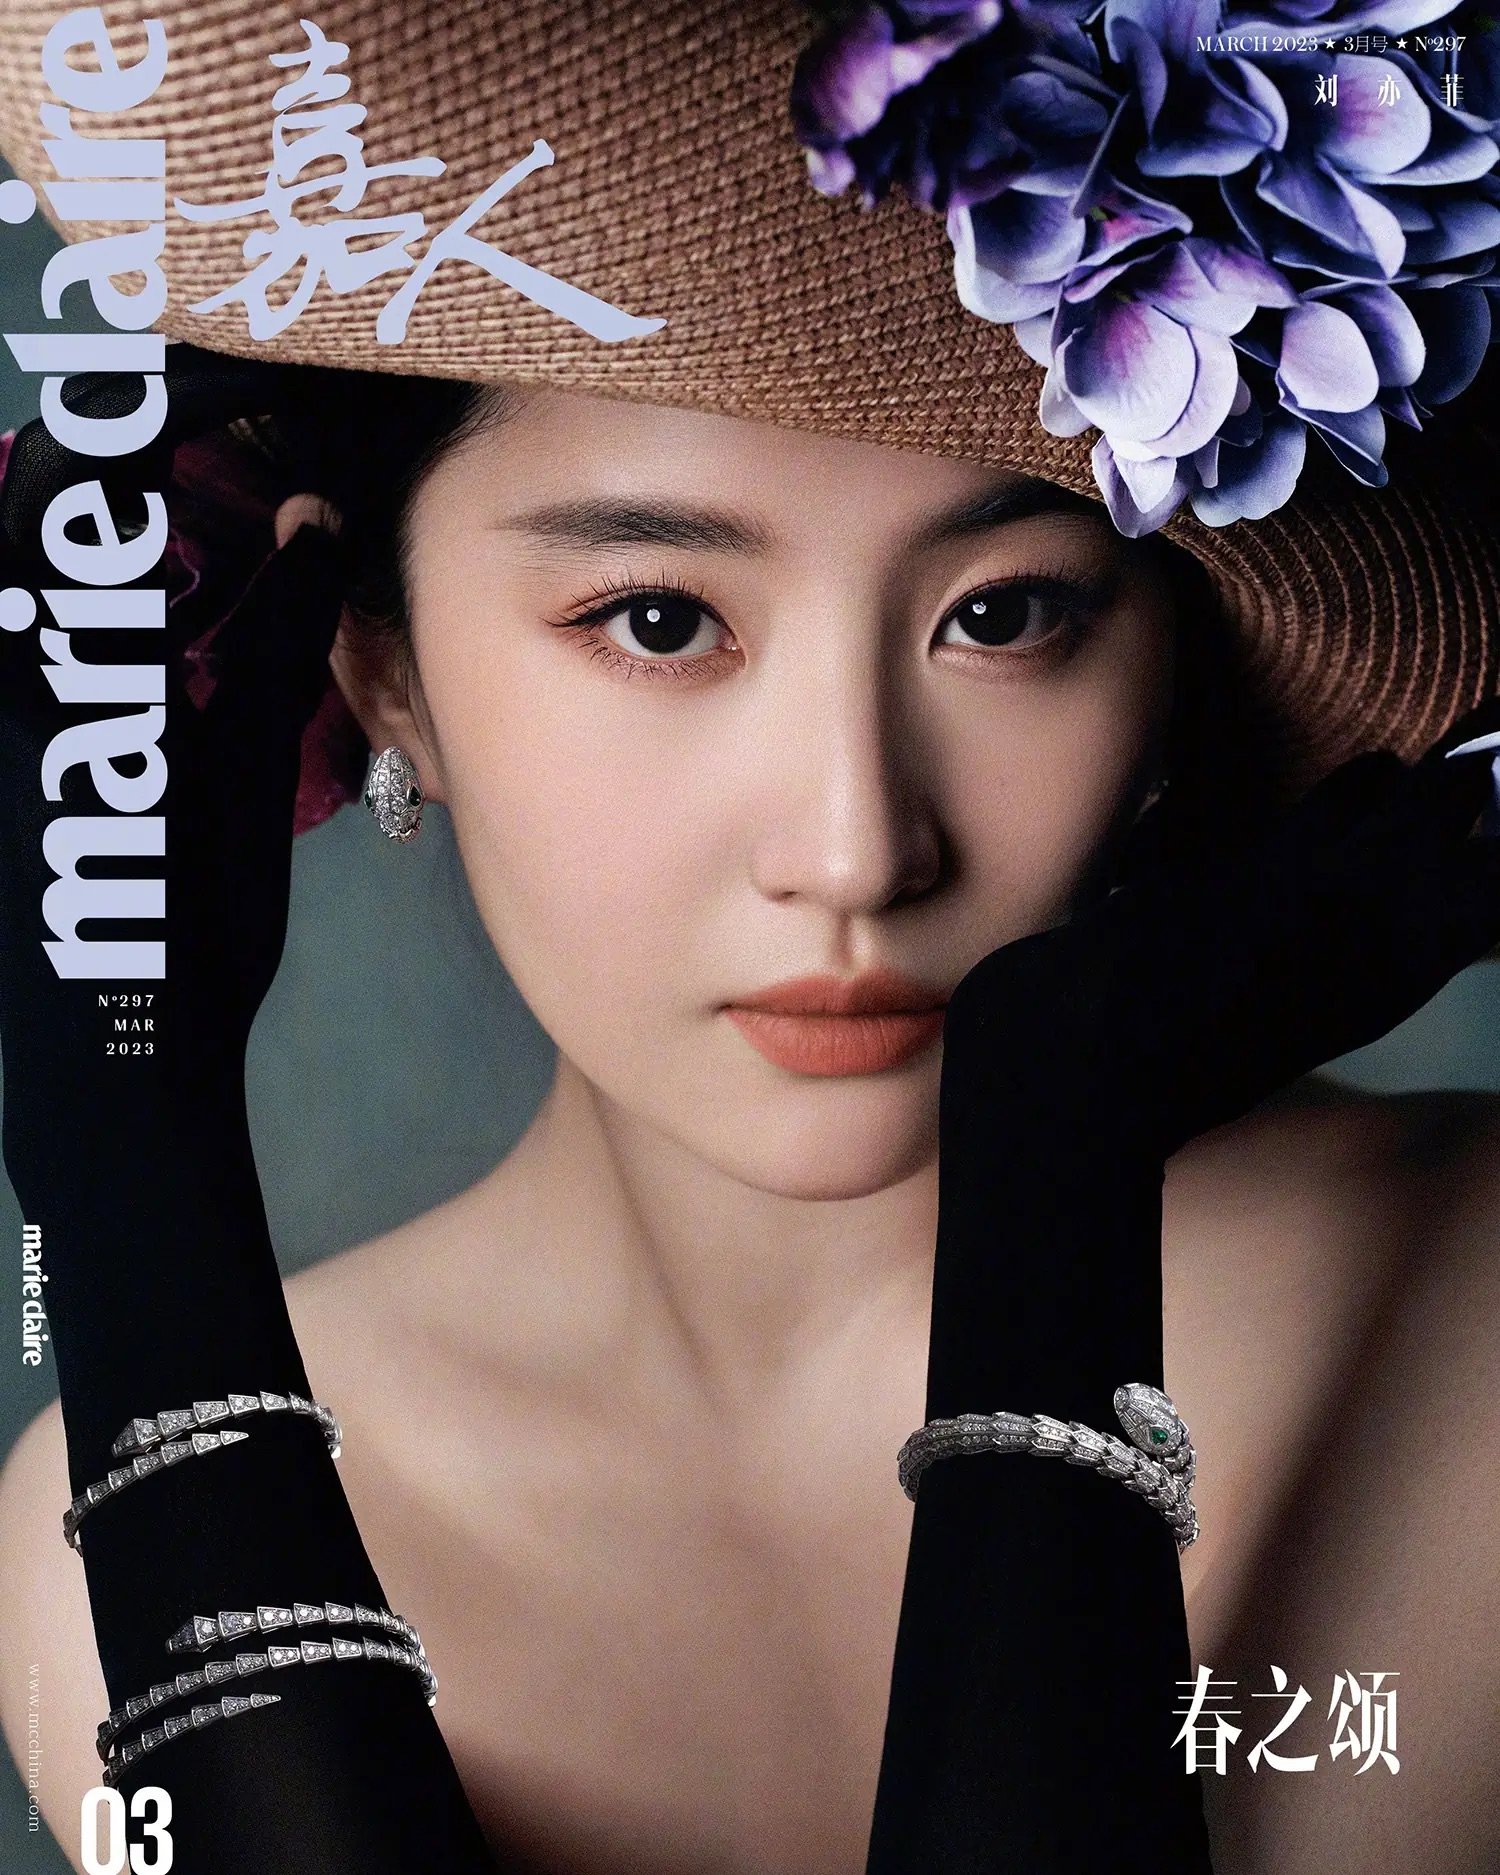 Louis Vuitton Ambassador Liu Yifei Covers Marie Claire China March 2023 —  Anne of Carversville